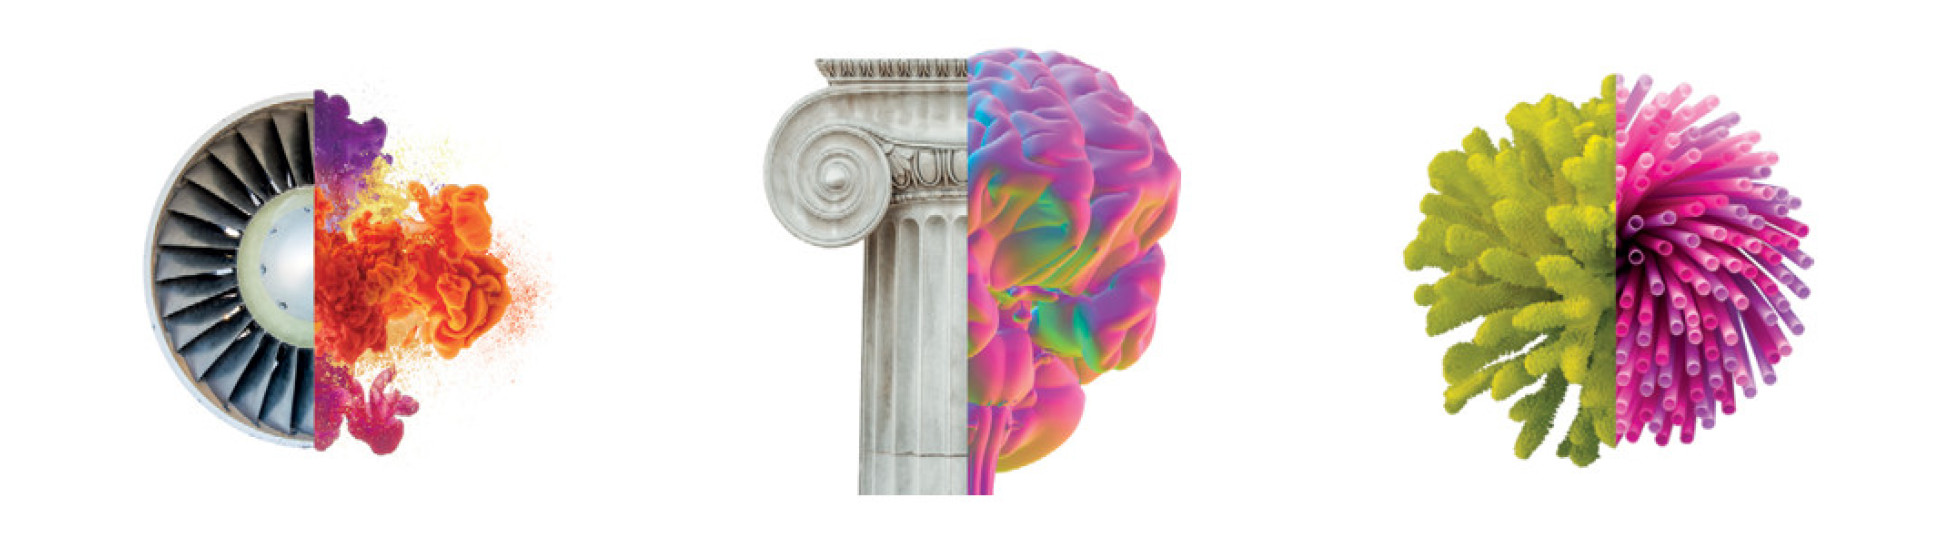 3 split images: jet propeller and coloured chemicals, column and brain, mineral and coral